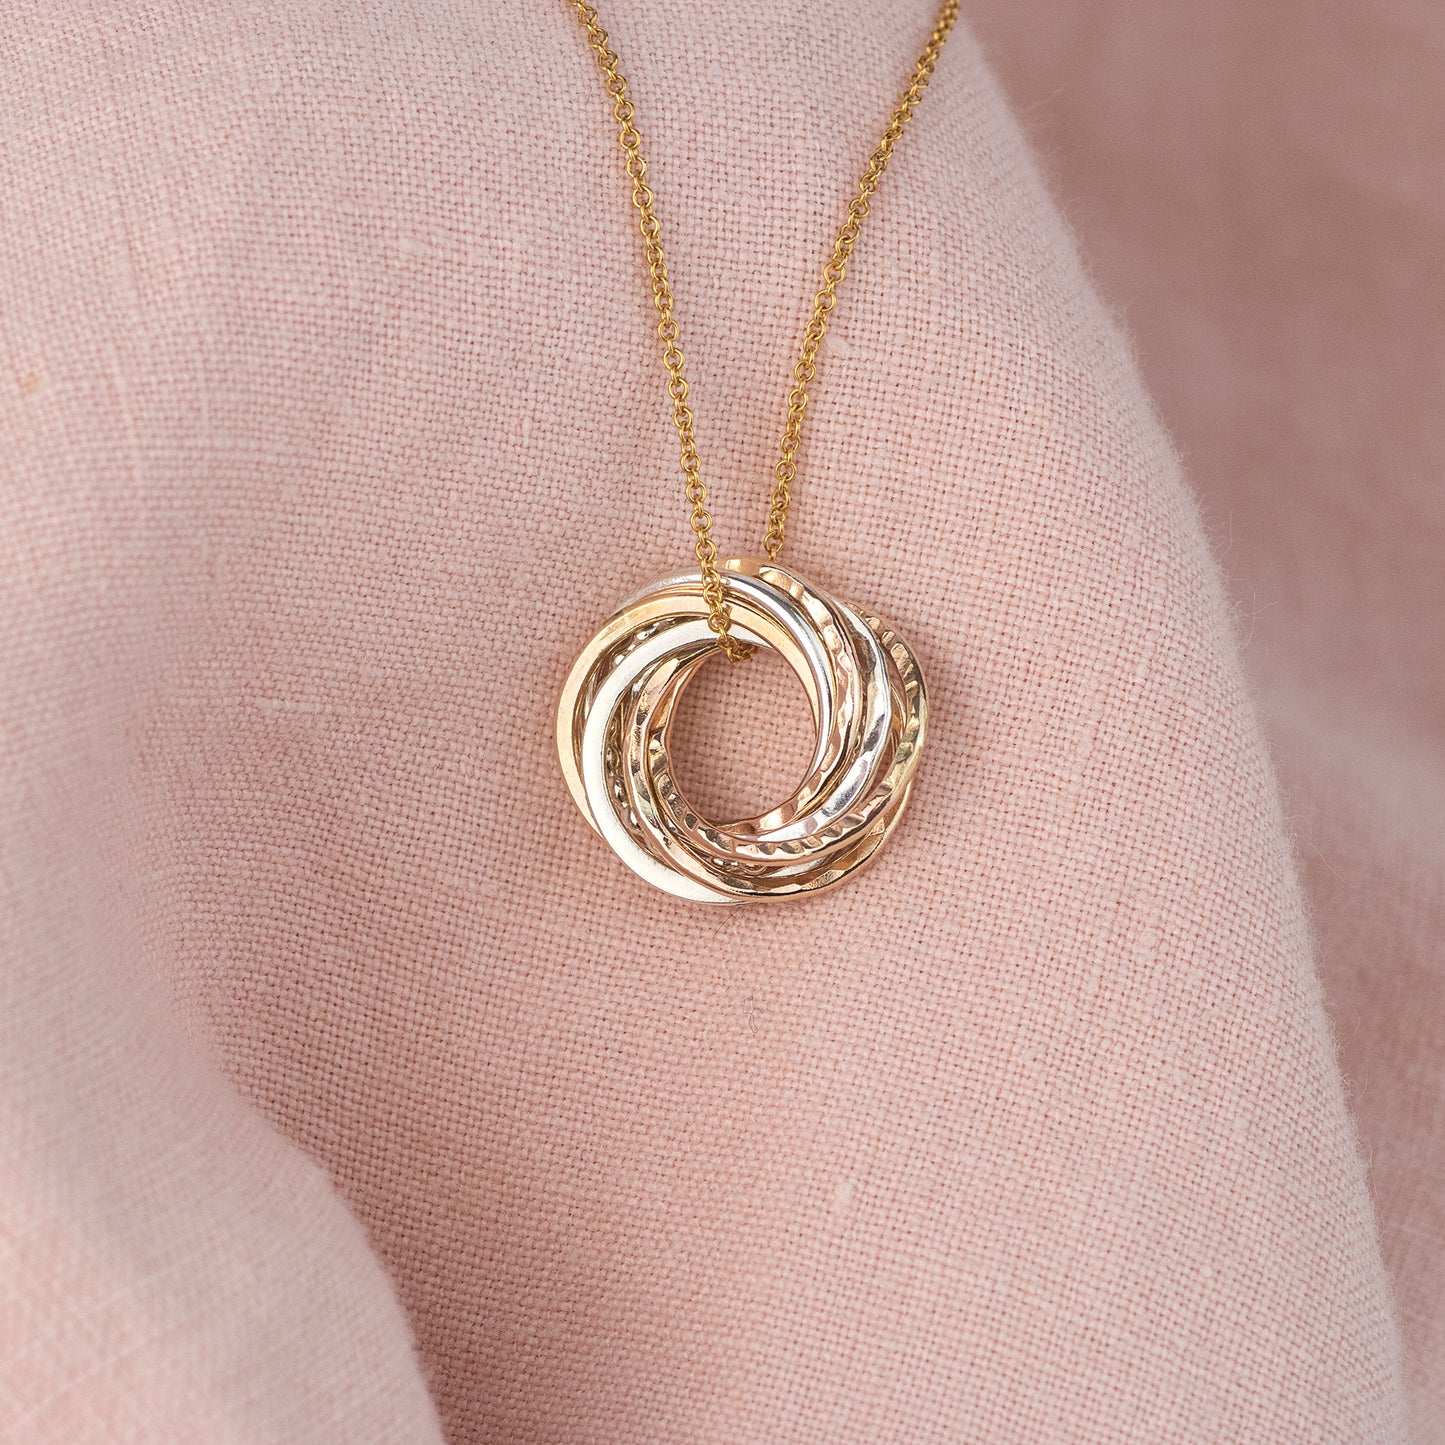 8th Anniversary Necklace - The Original 8 Rings for 8 Years Necklace - Silver & Gold